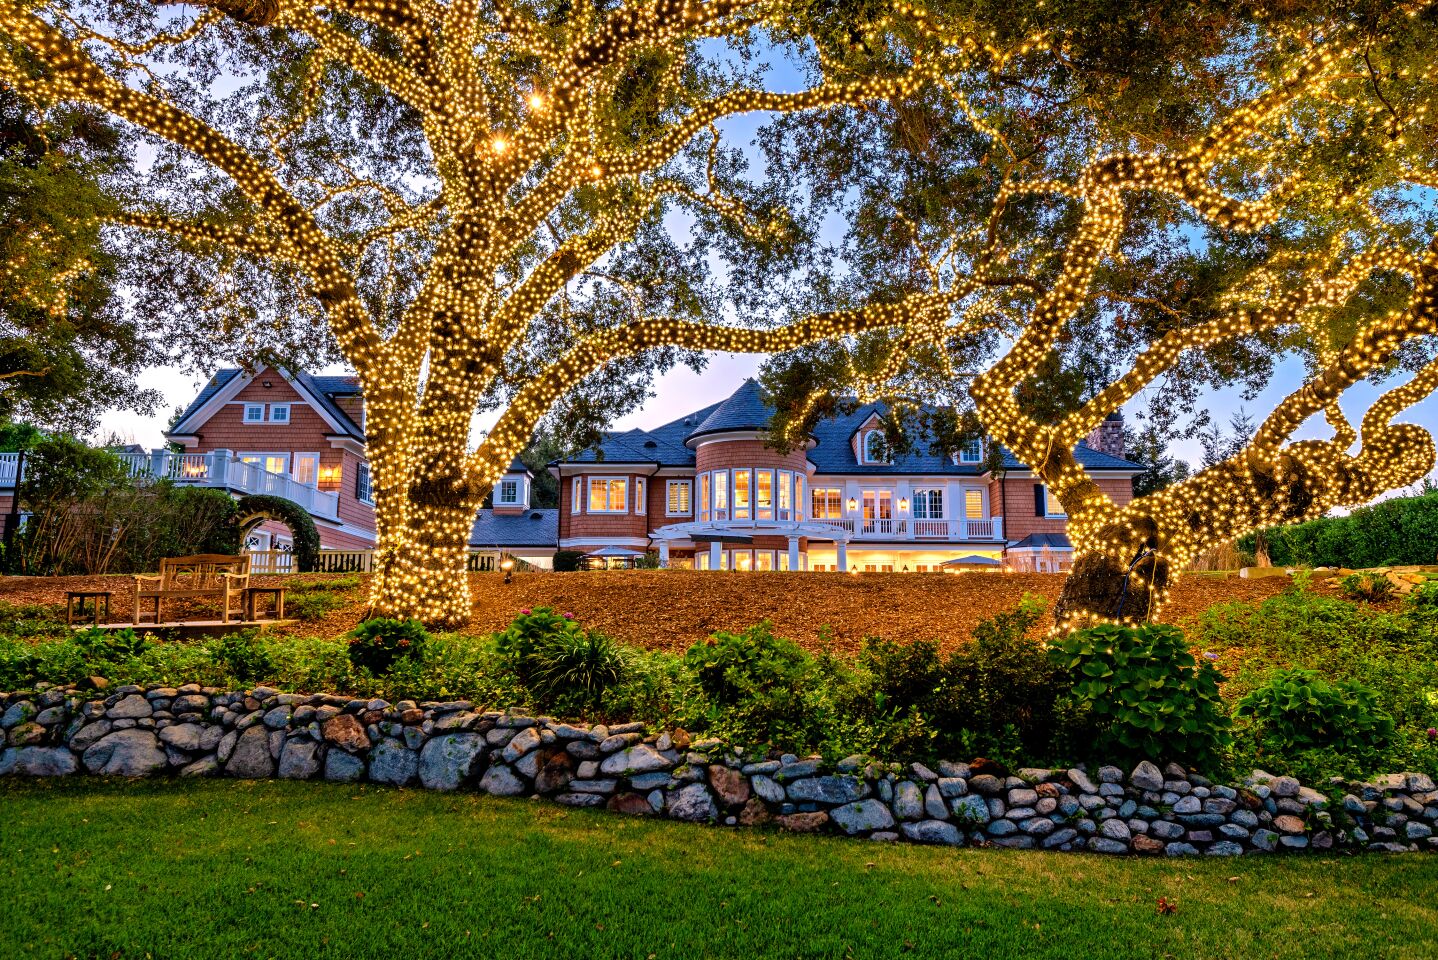 Home of the Week | Chic Hamptons style in Lake Sherwood